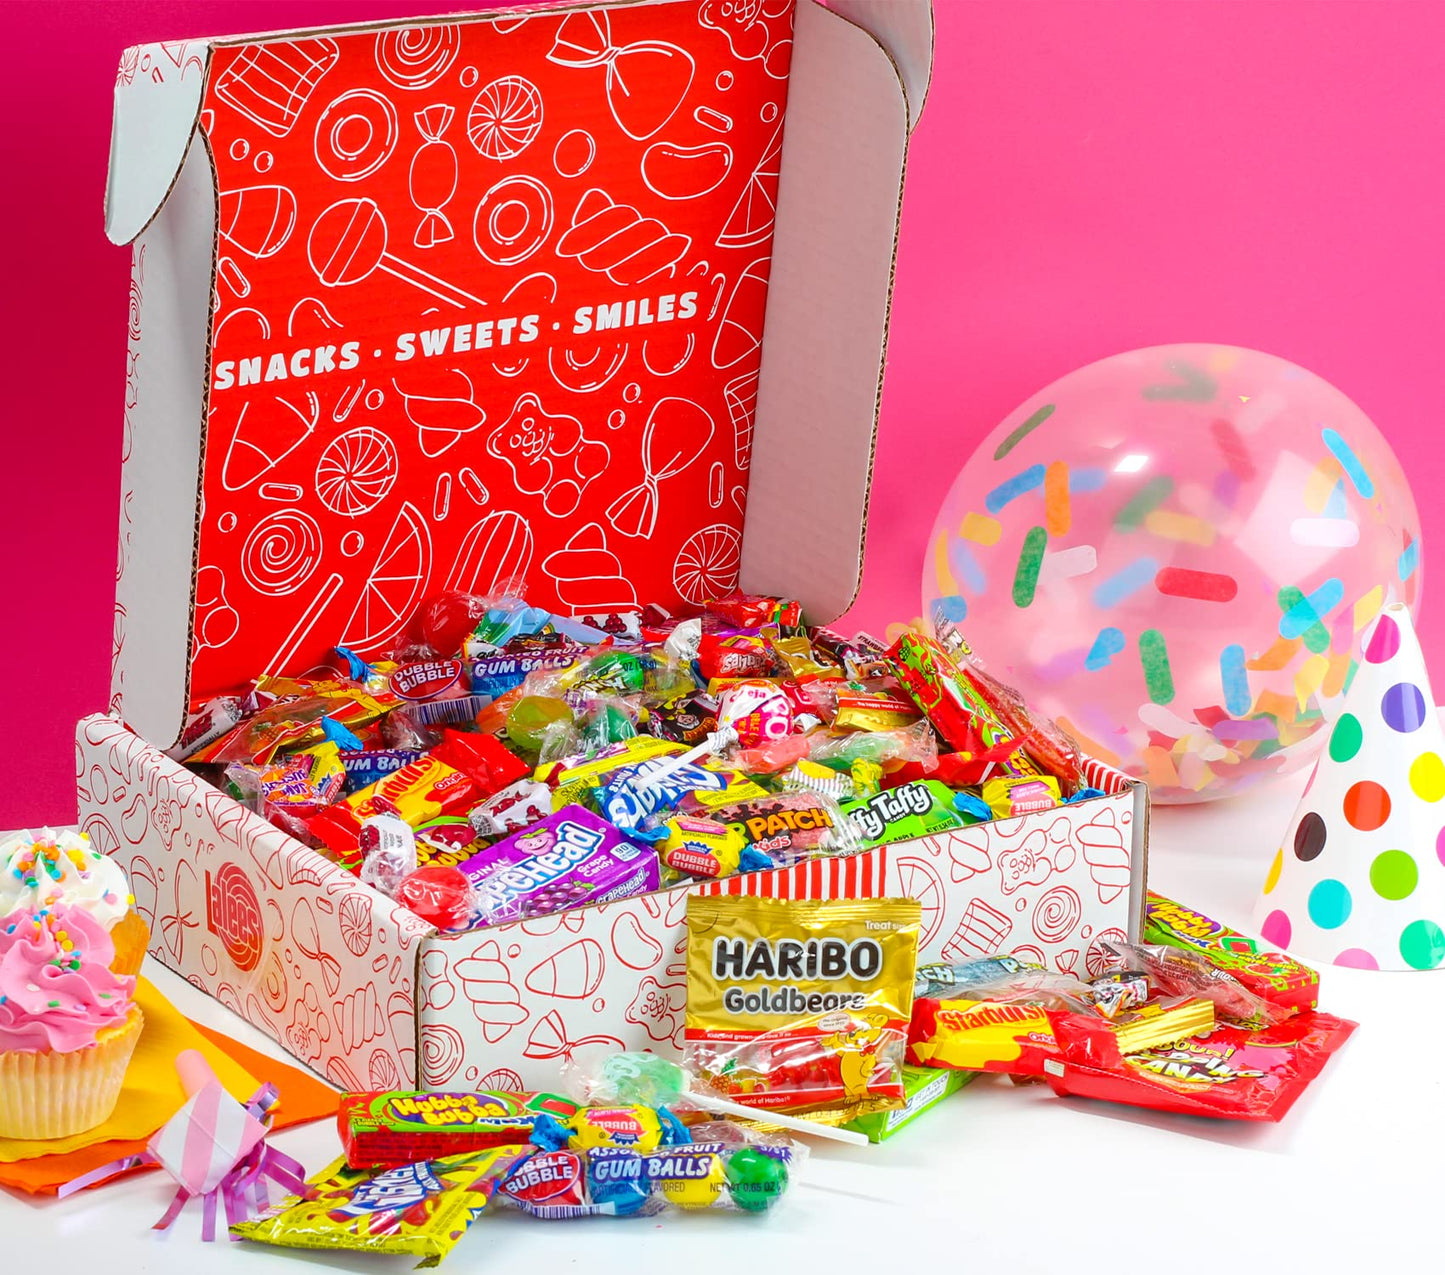 Lalees Candy Gift Box - 3 Pounds - Gifting Candy Baskets - Candy Box for Kids/Adults - Care Packages - Candy Variety Box - Crave Candy